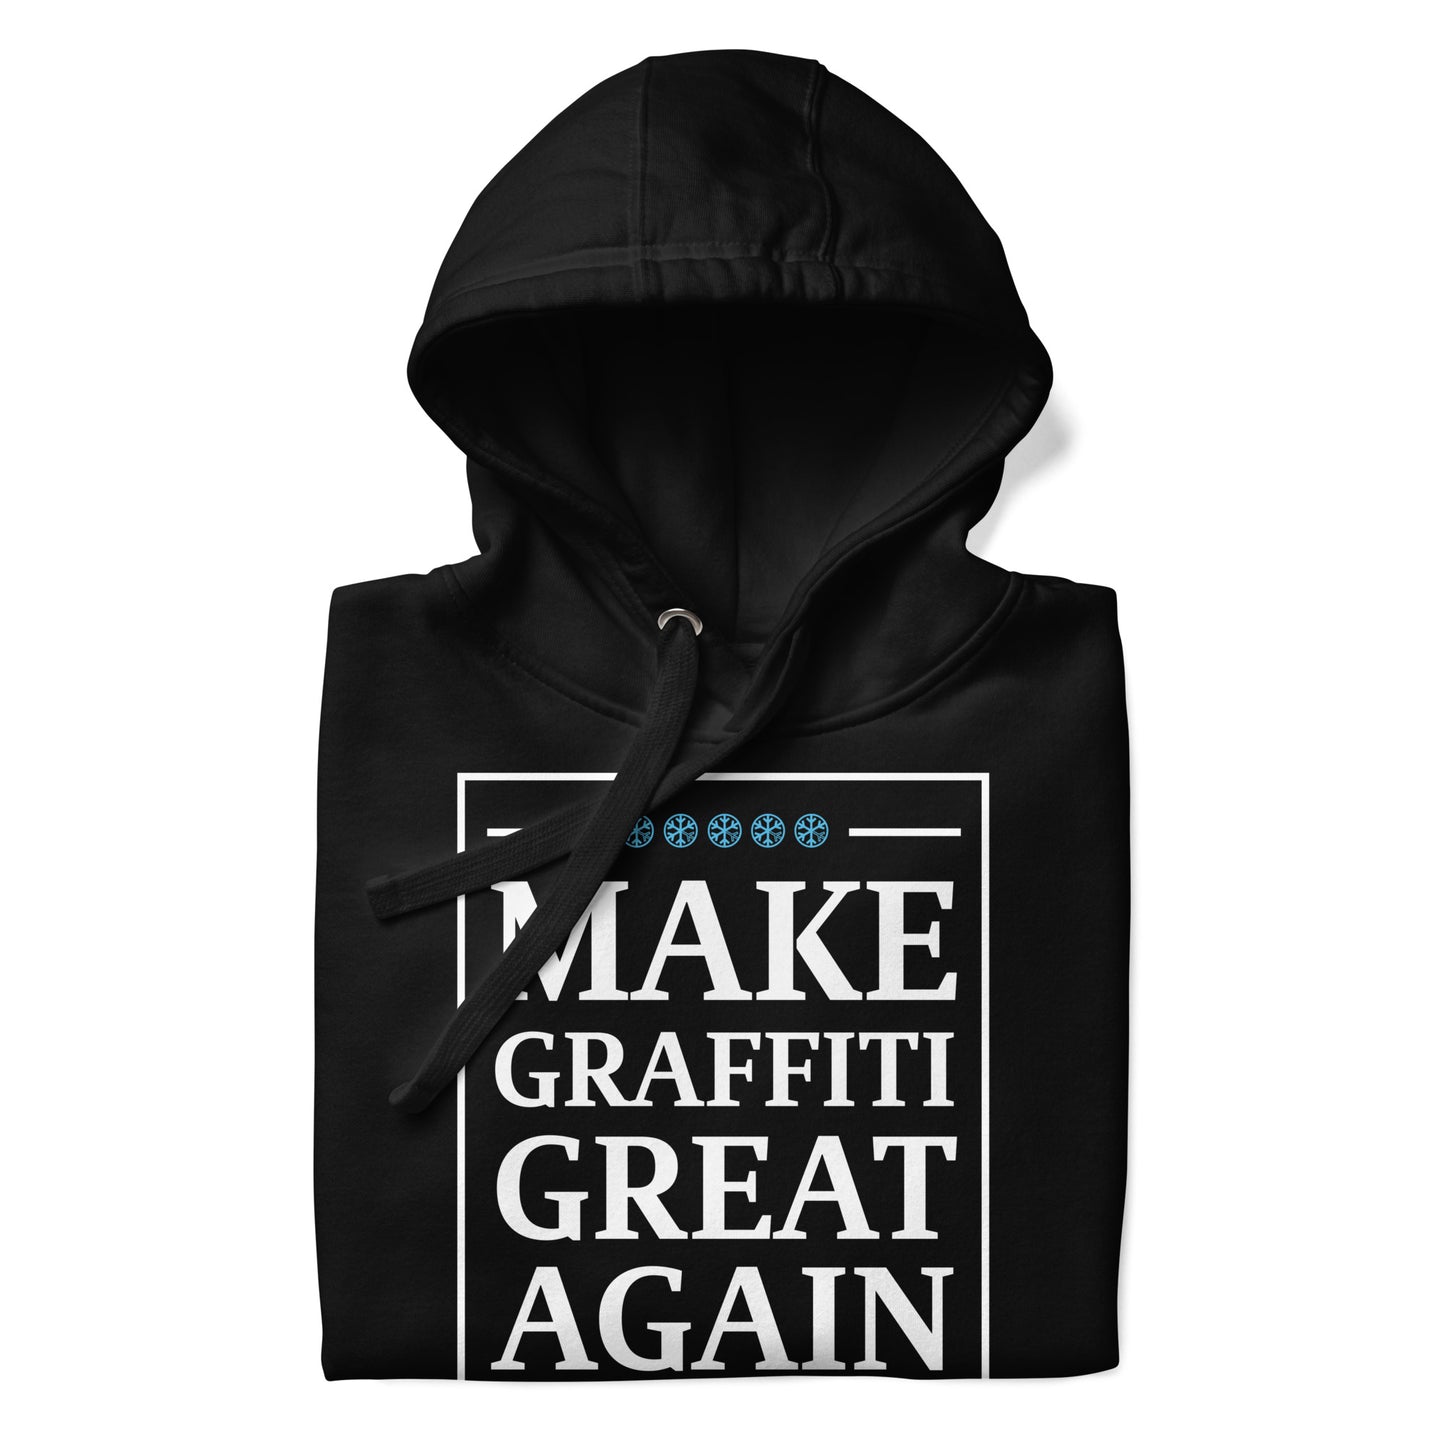 folded make graffiti great again hoodie by b.different clothing graffiti and street art inspired streetwear brand for weirdos, misfits, and outcasts.